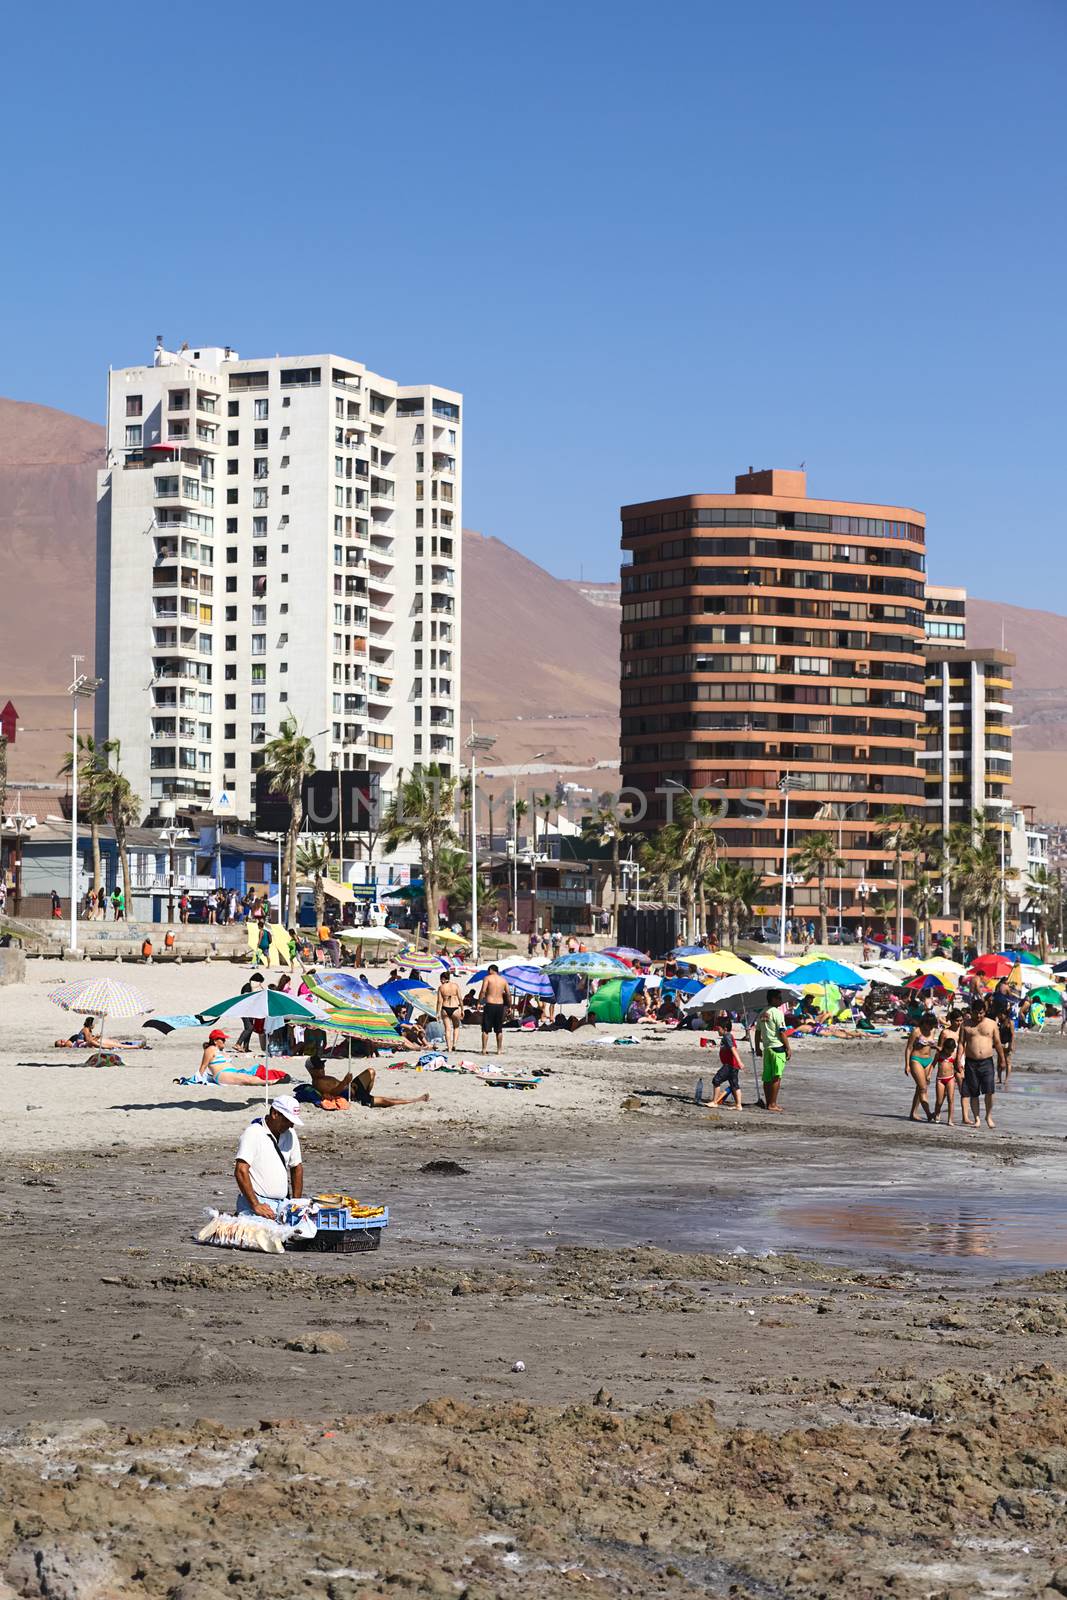 IQUIQUE, CHILE - FEBRUARY 10, 2015: Unidentified people on sandy Cavancha beach on February 10, 2015 in Iquique, Chile. Iquique is a popular beach town and free port city in Northern Chile. 